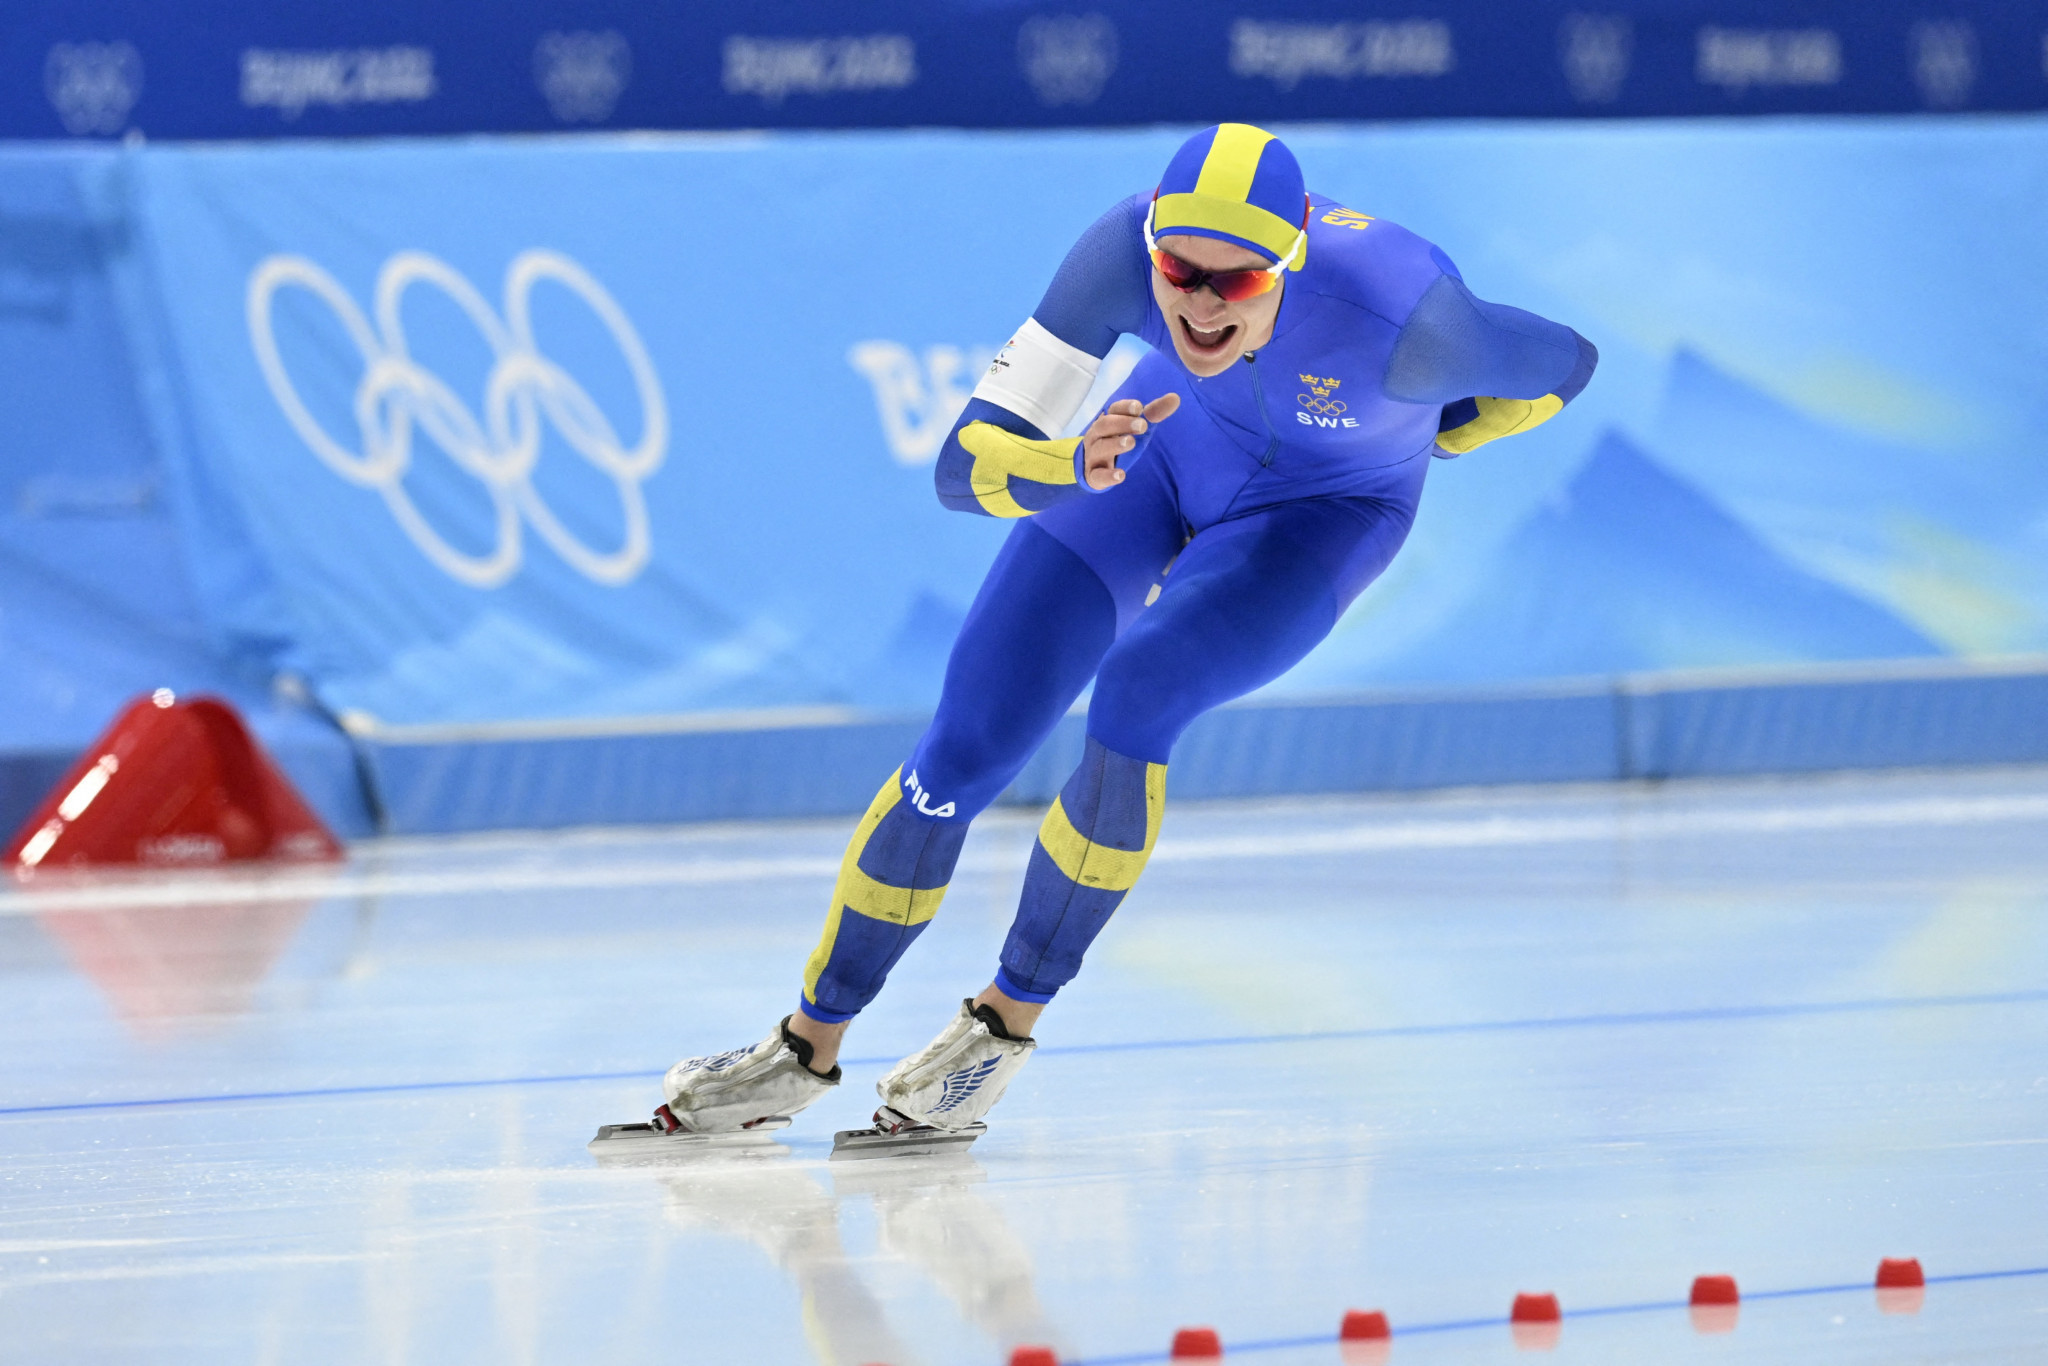 Nils van der Poel broke the Olympic record in the men's 5,000m to become Sweden's first speed skating gold medallist since 1988 ©Getty Images